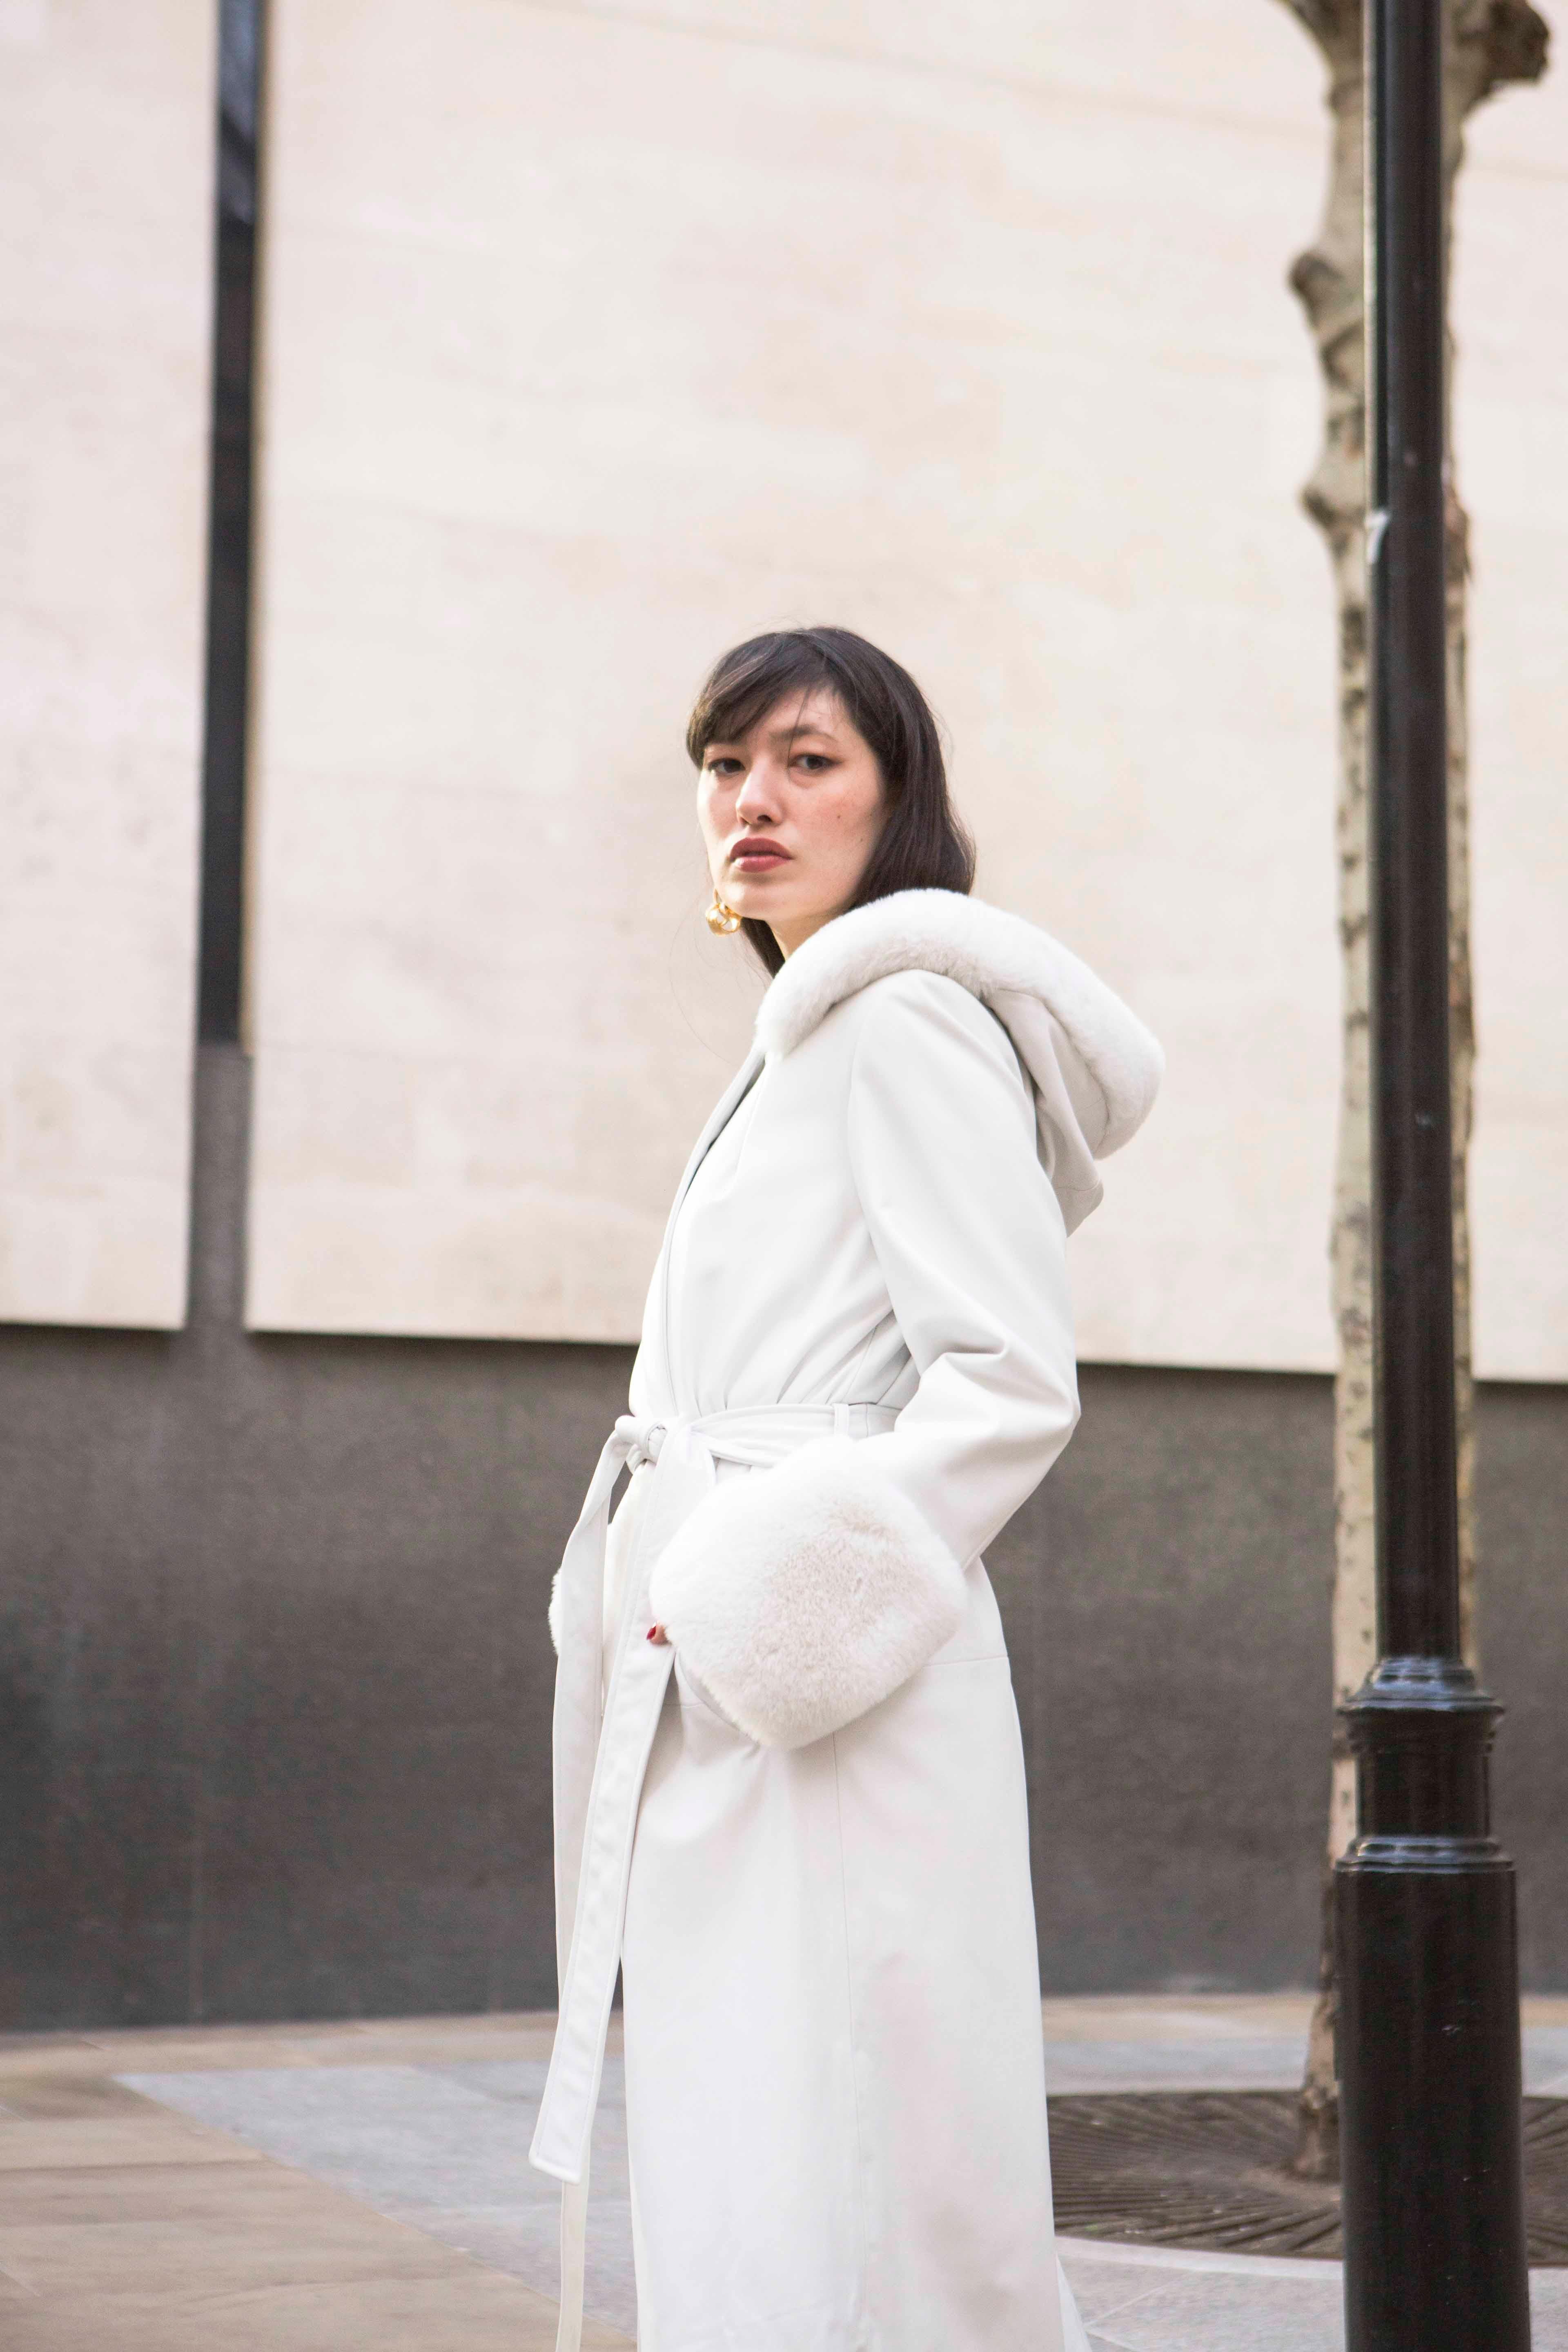 Verheyen Aurora Hooded Leather Trench Coat in White with Faux Fur - Size uk 8 In New Condition For Sale In London, GB